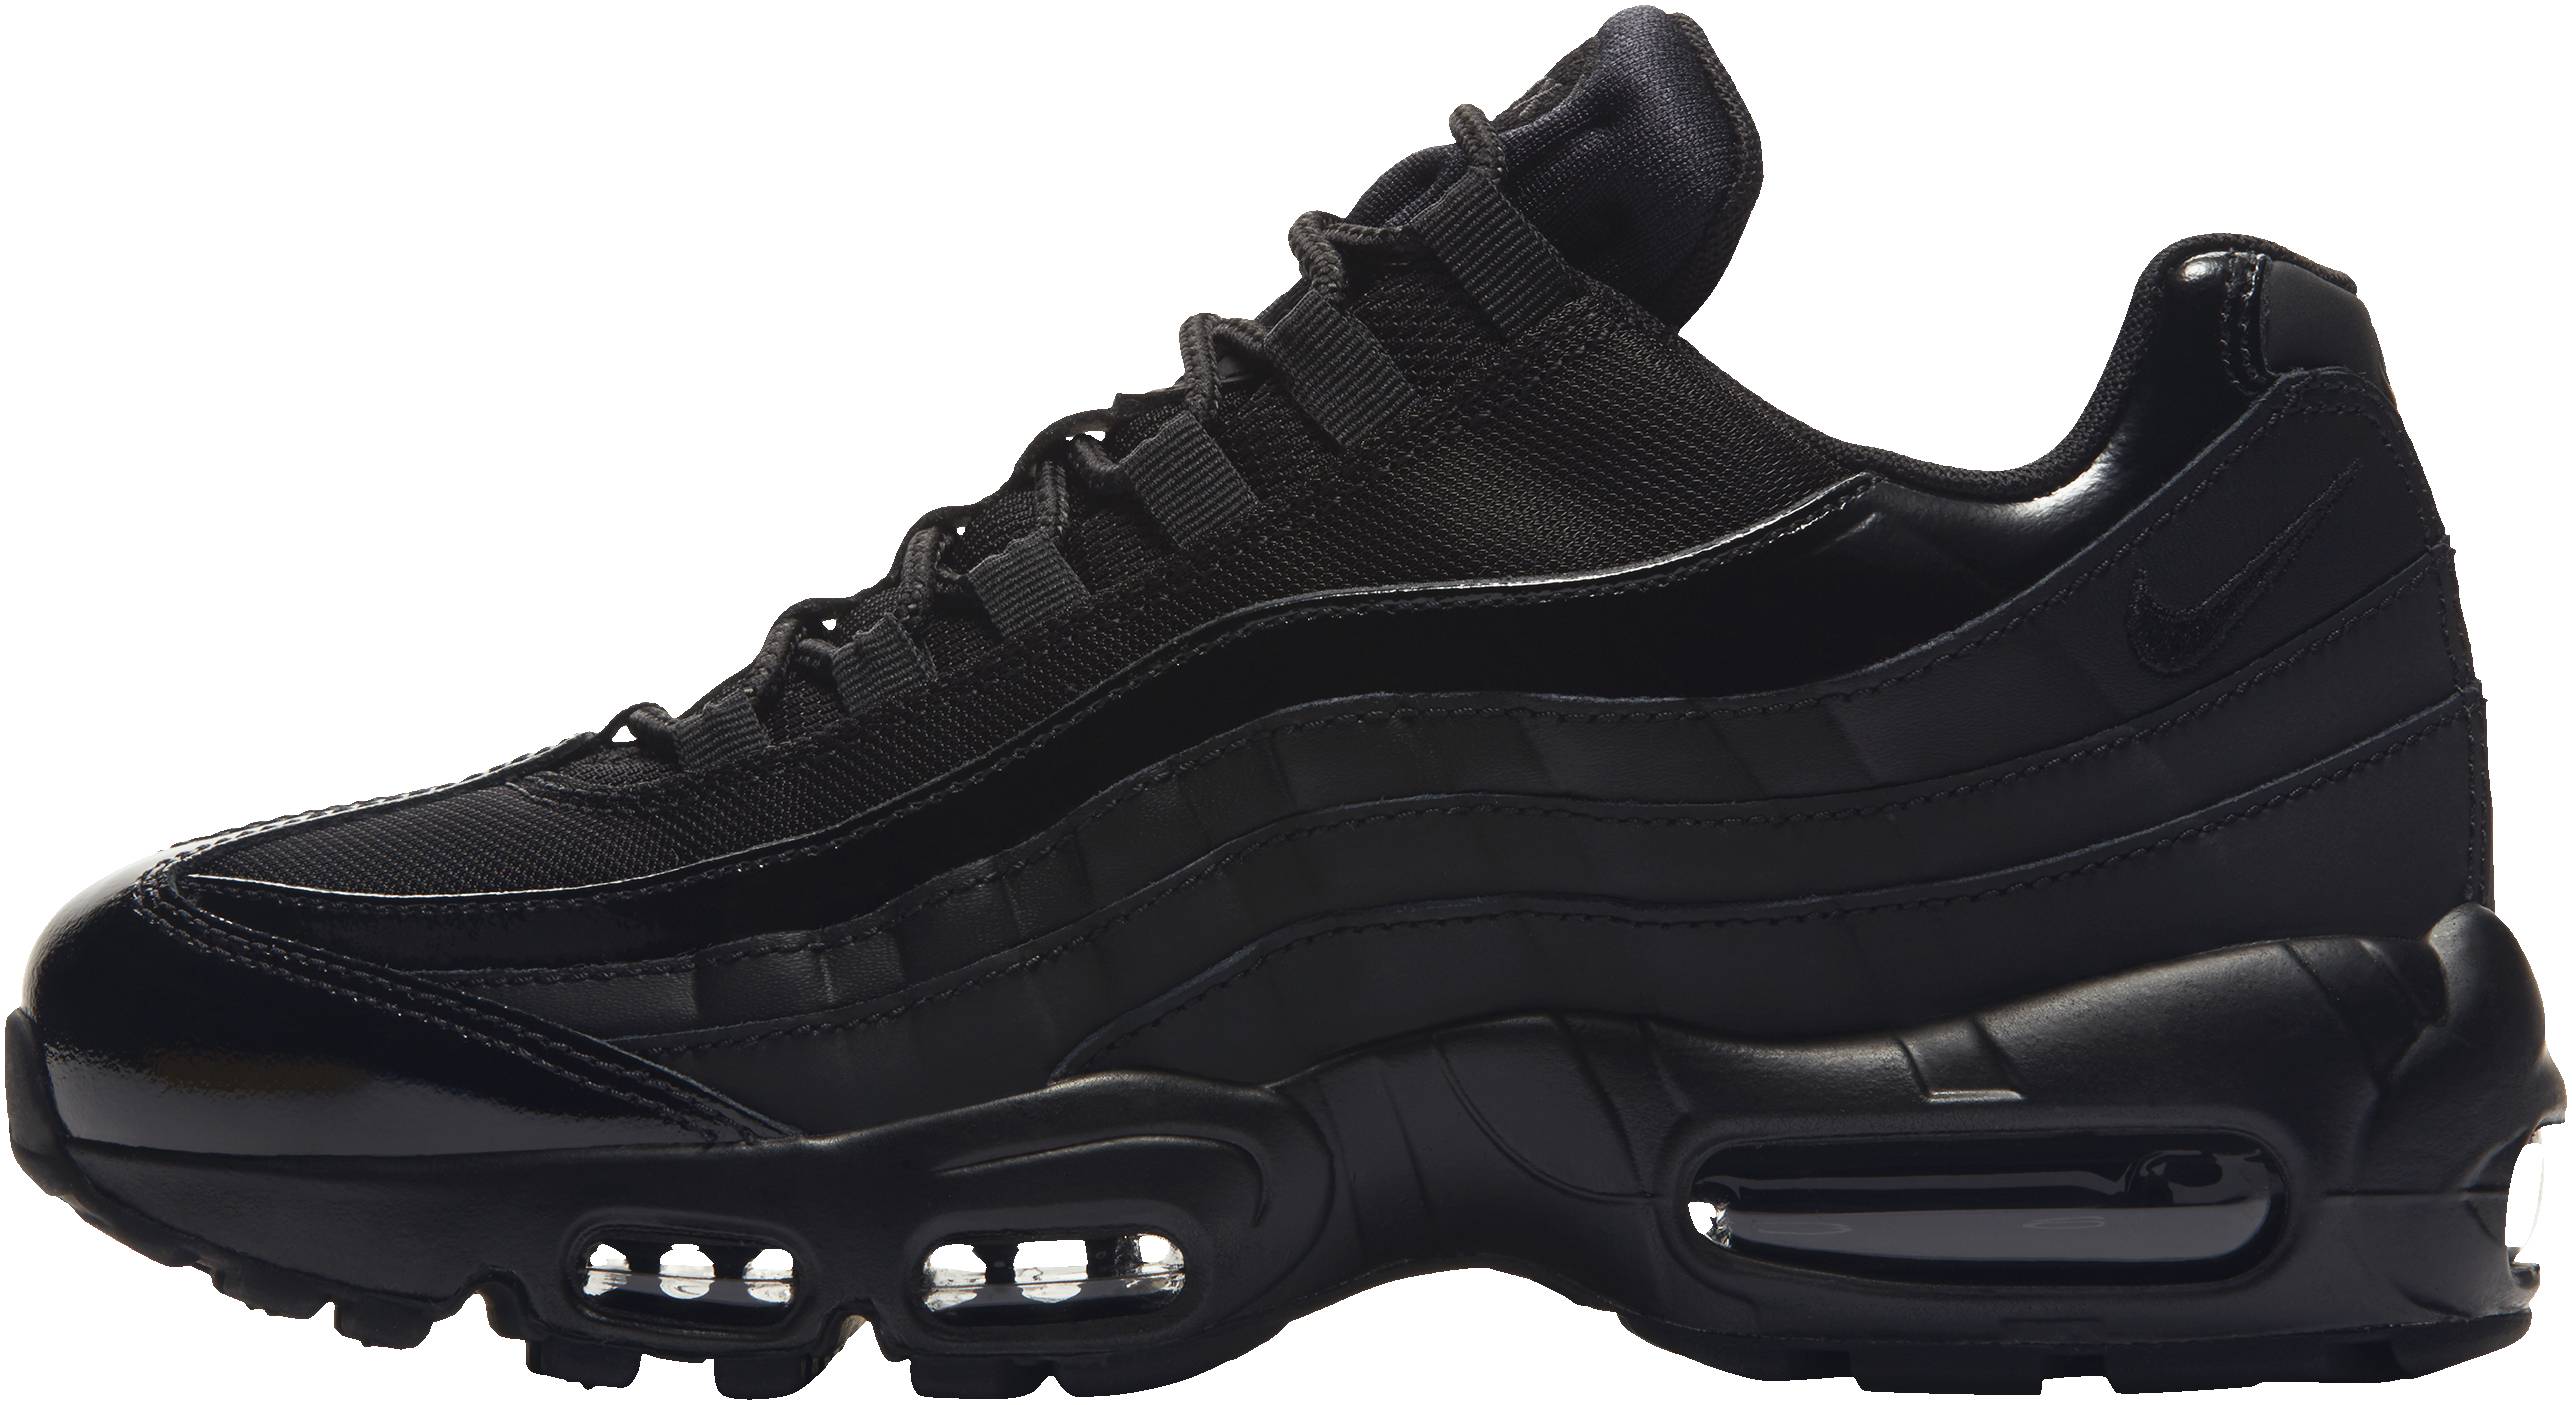 Only £89 + Review of Nike Air Max 95 